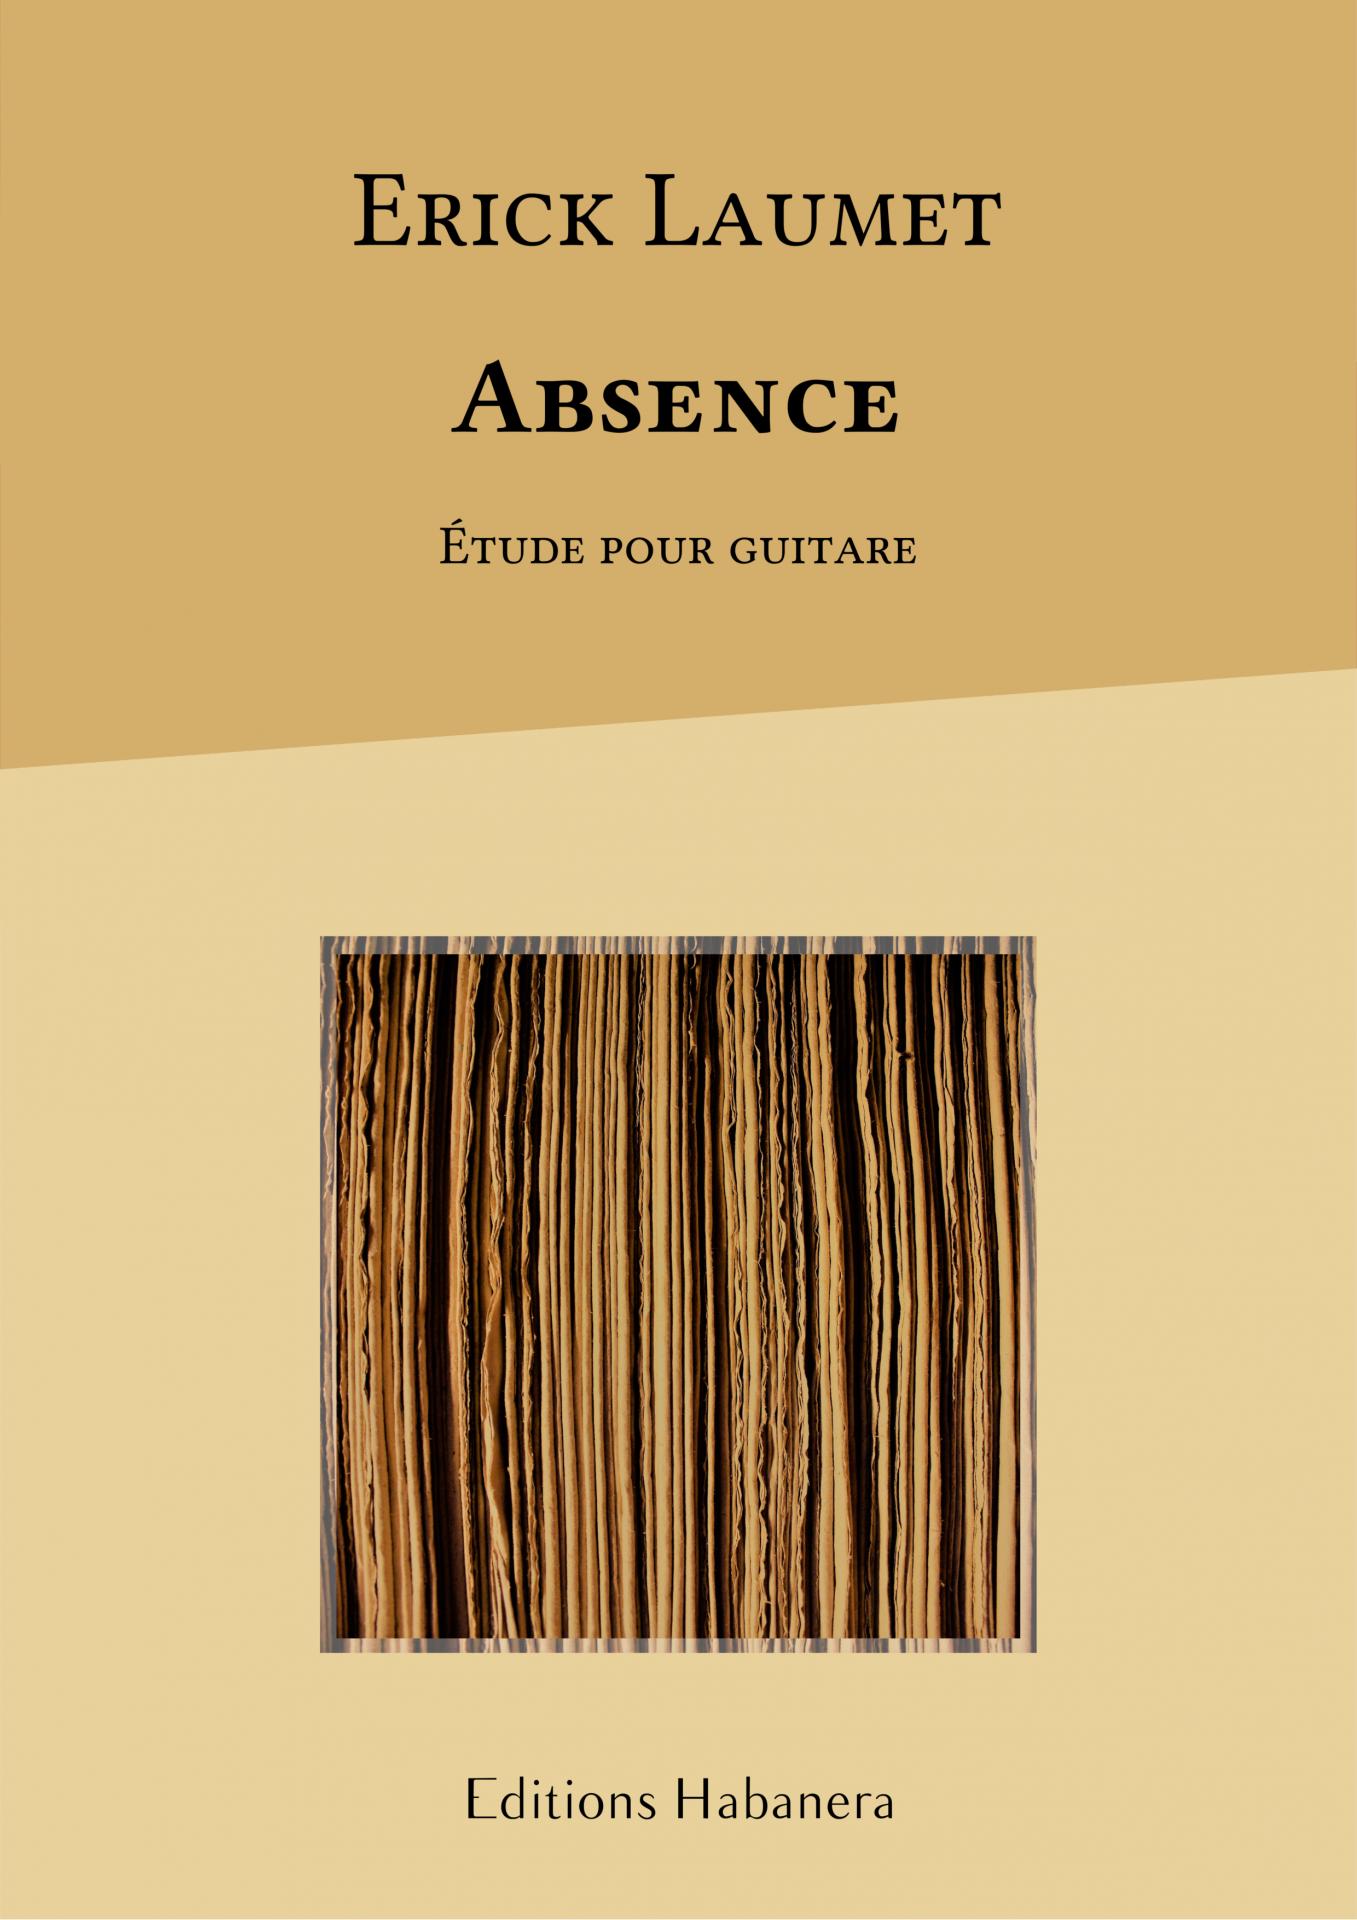 Eh 09 1 el absence erick laumet small